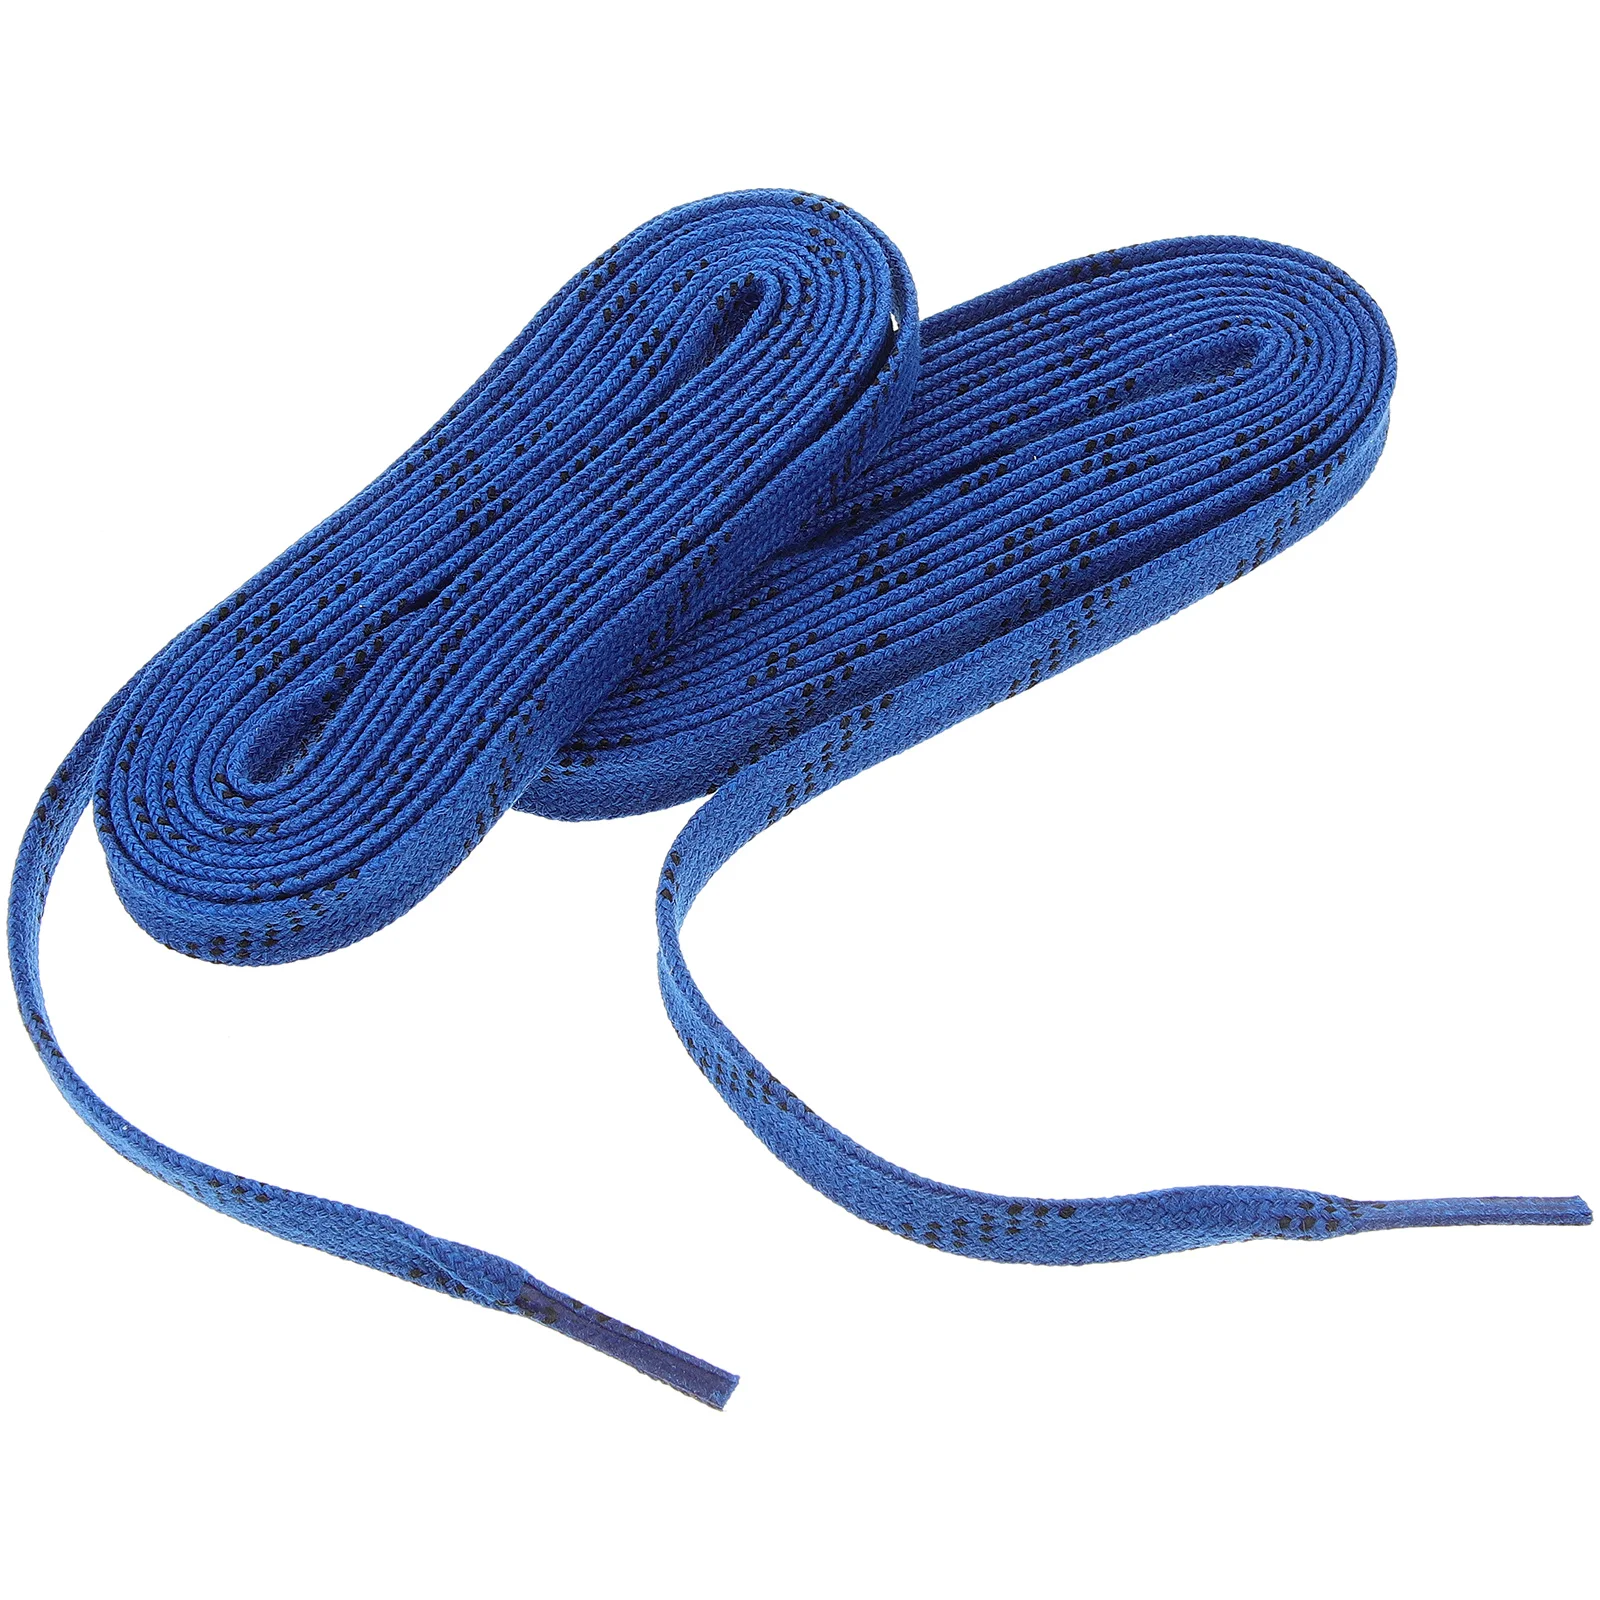 1 Pair of Wear-resistant Ice Skates Laces Hockey Sports Shoelaces Ice Sports Skates Shoelaces